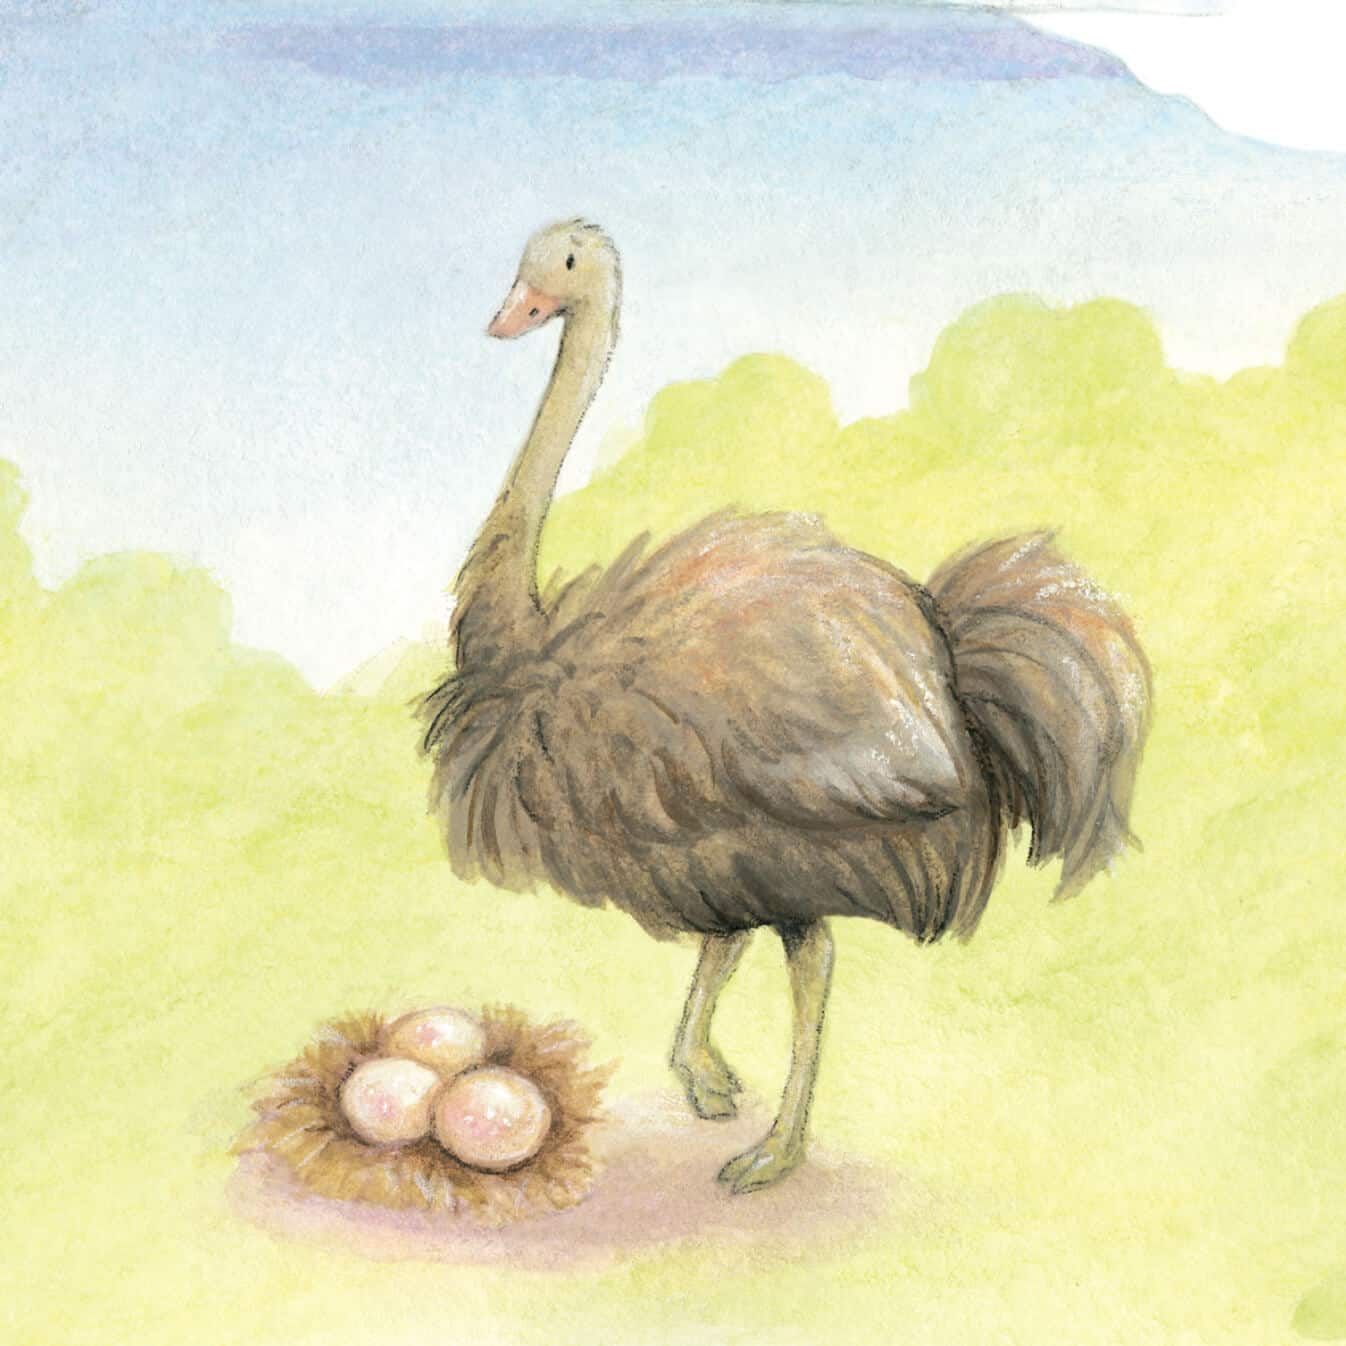 olivia the ostrich illlustrated character from guion the lion